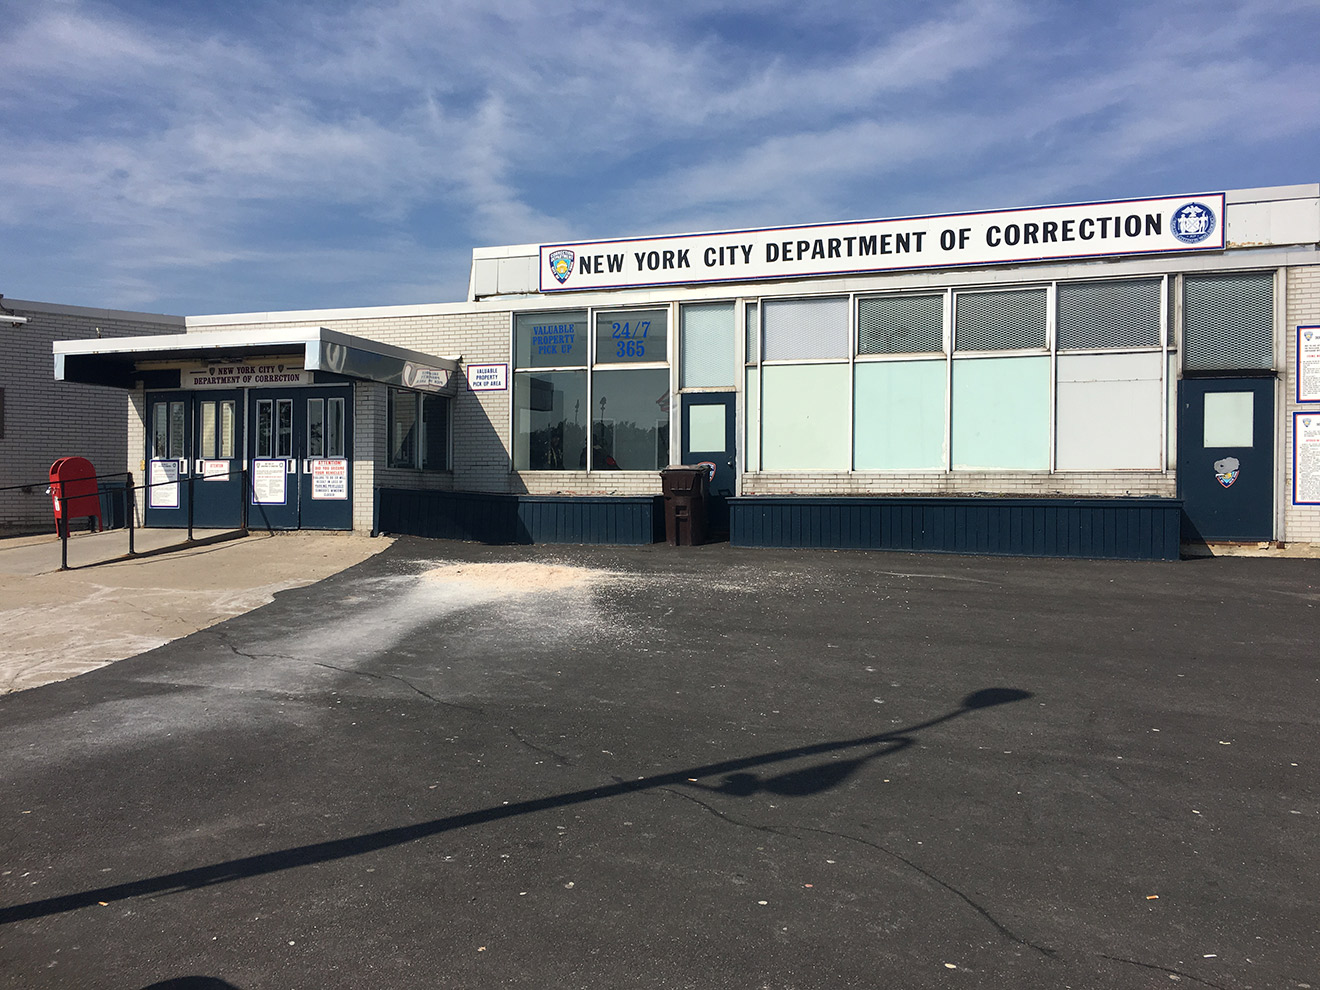 The entrance to Rikers